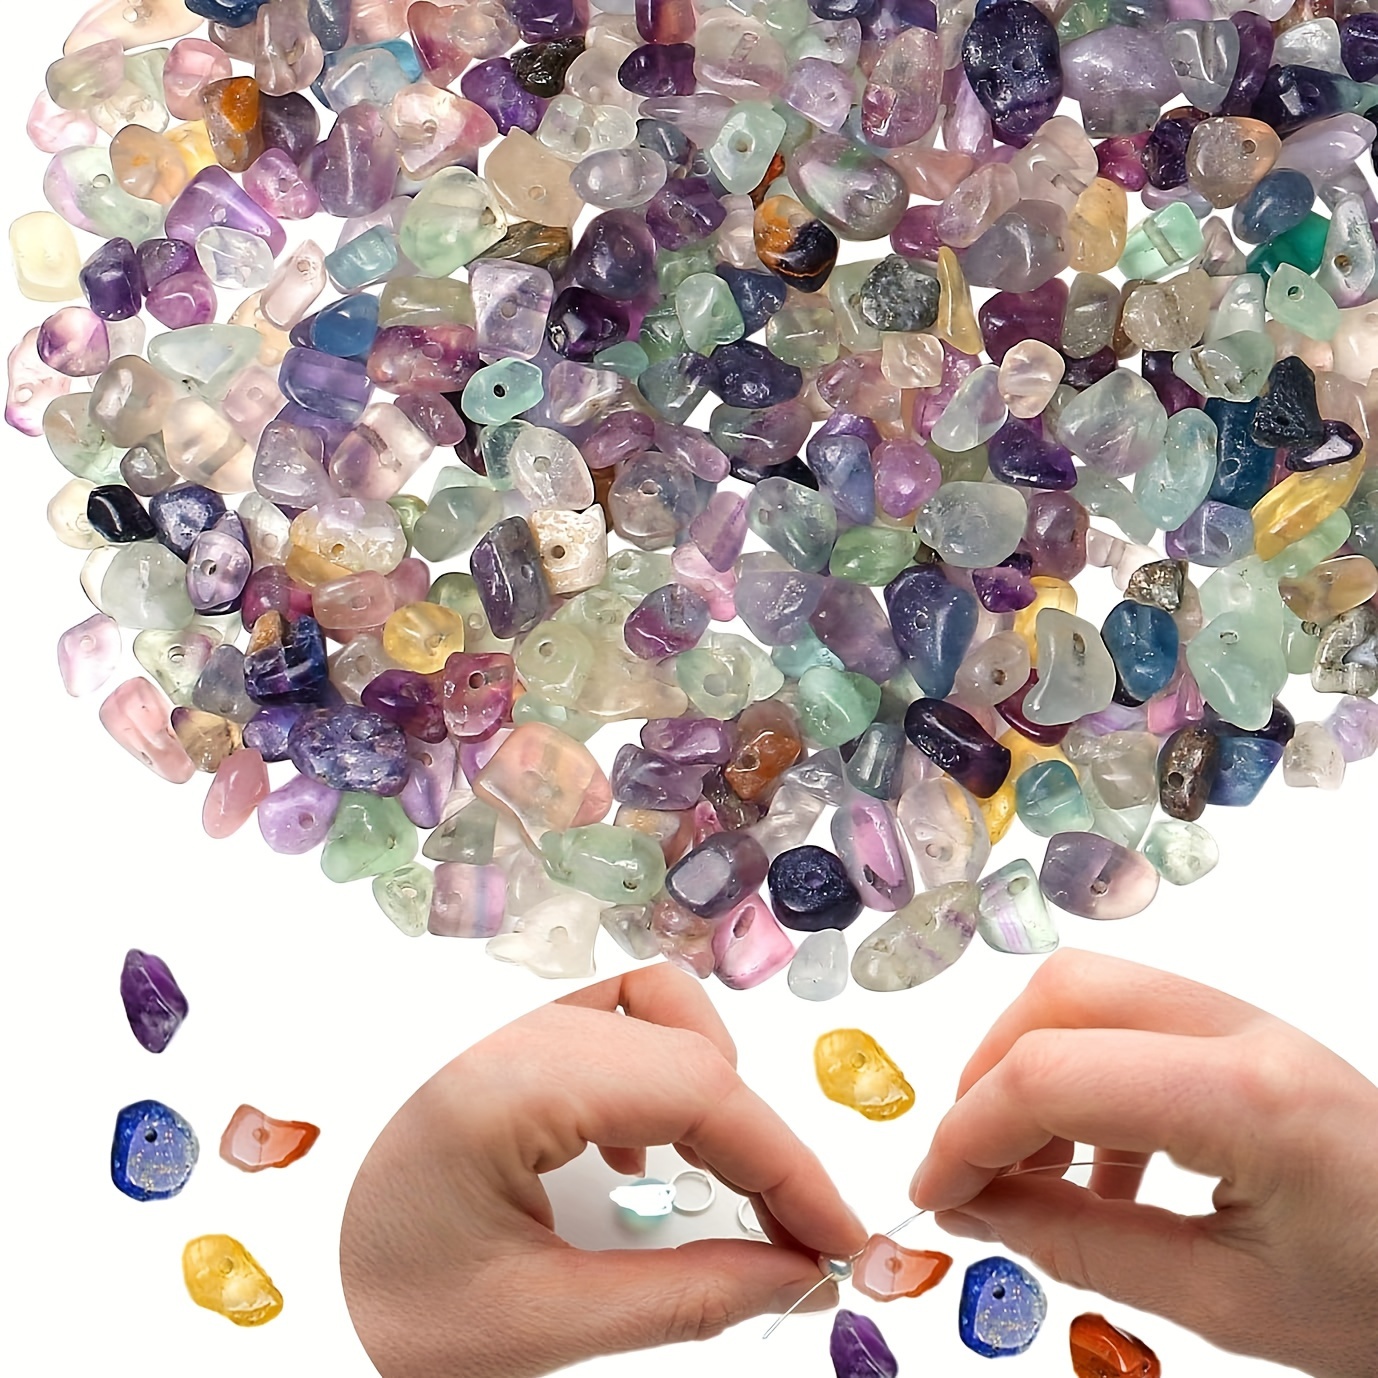 

400pcs Natural Fluorite Beads 5-8mm - Irregular Crystal Gemstones For Diy Jewelry Making, Bracelet & Necklace Craft Supplies With Drilled Holes Beads For Jewelry Making Glass Beads For Jewelry Making